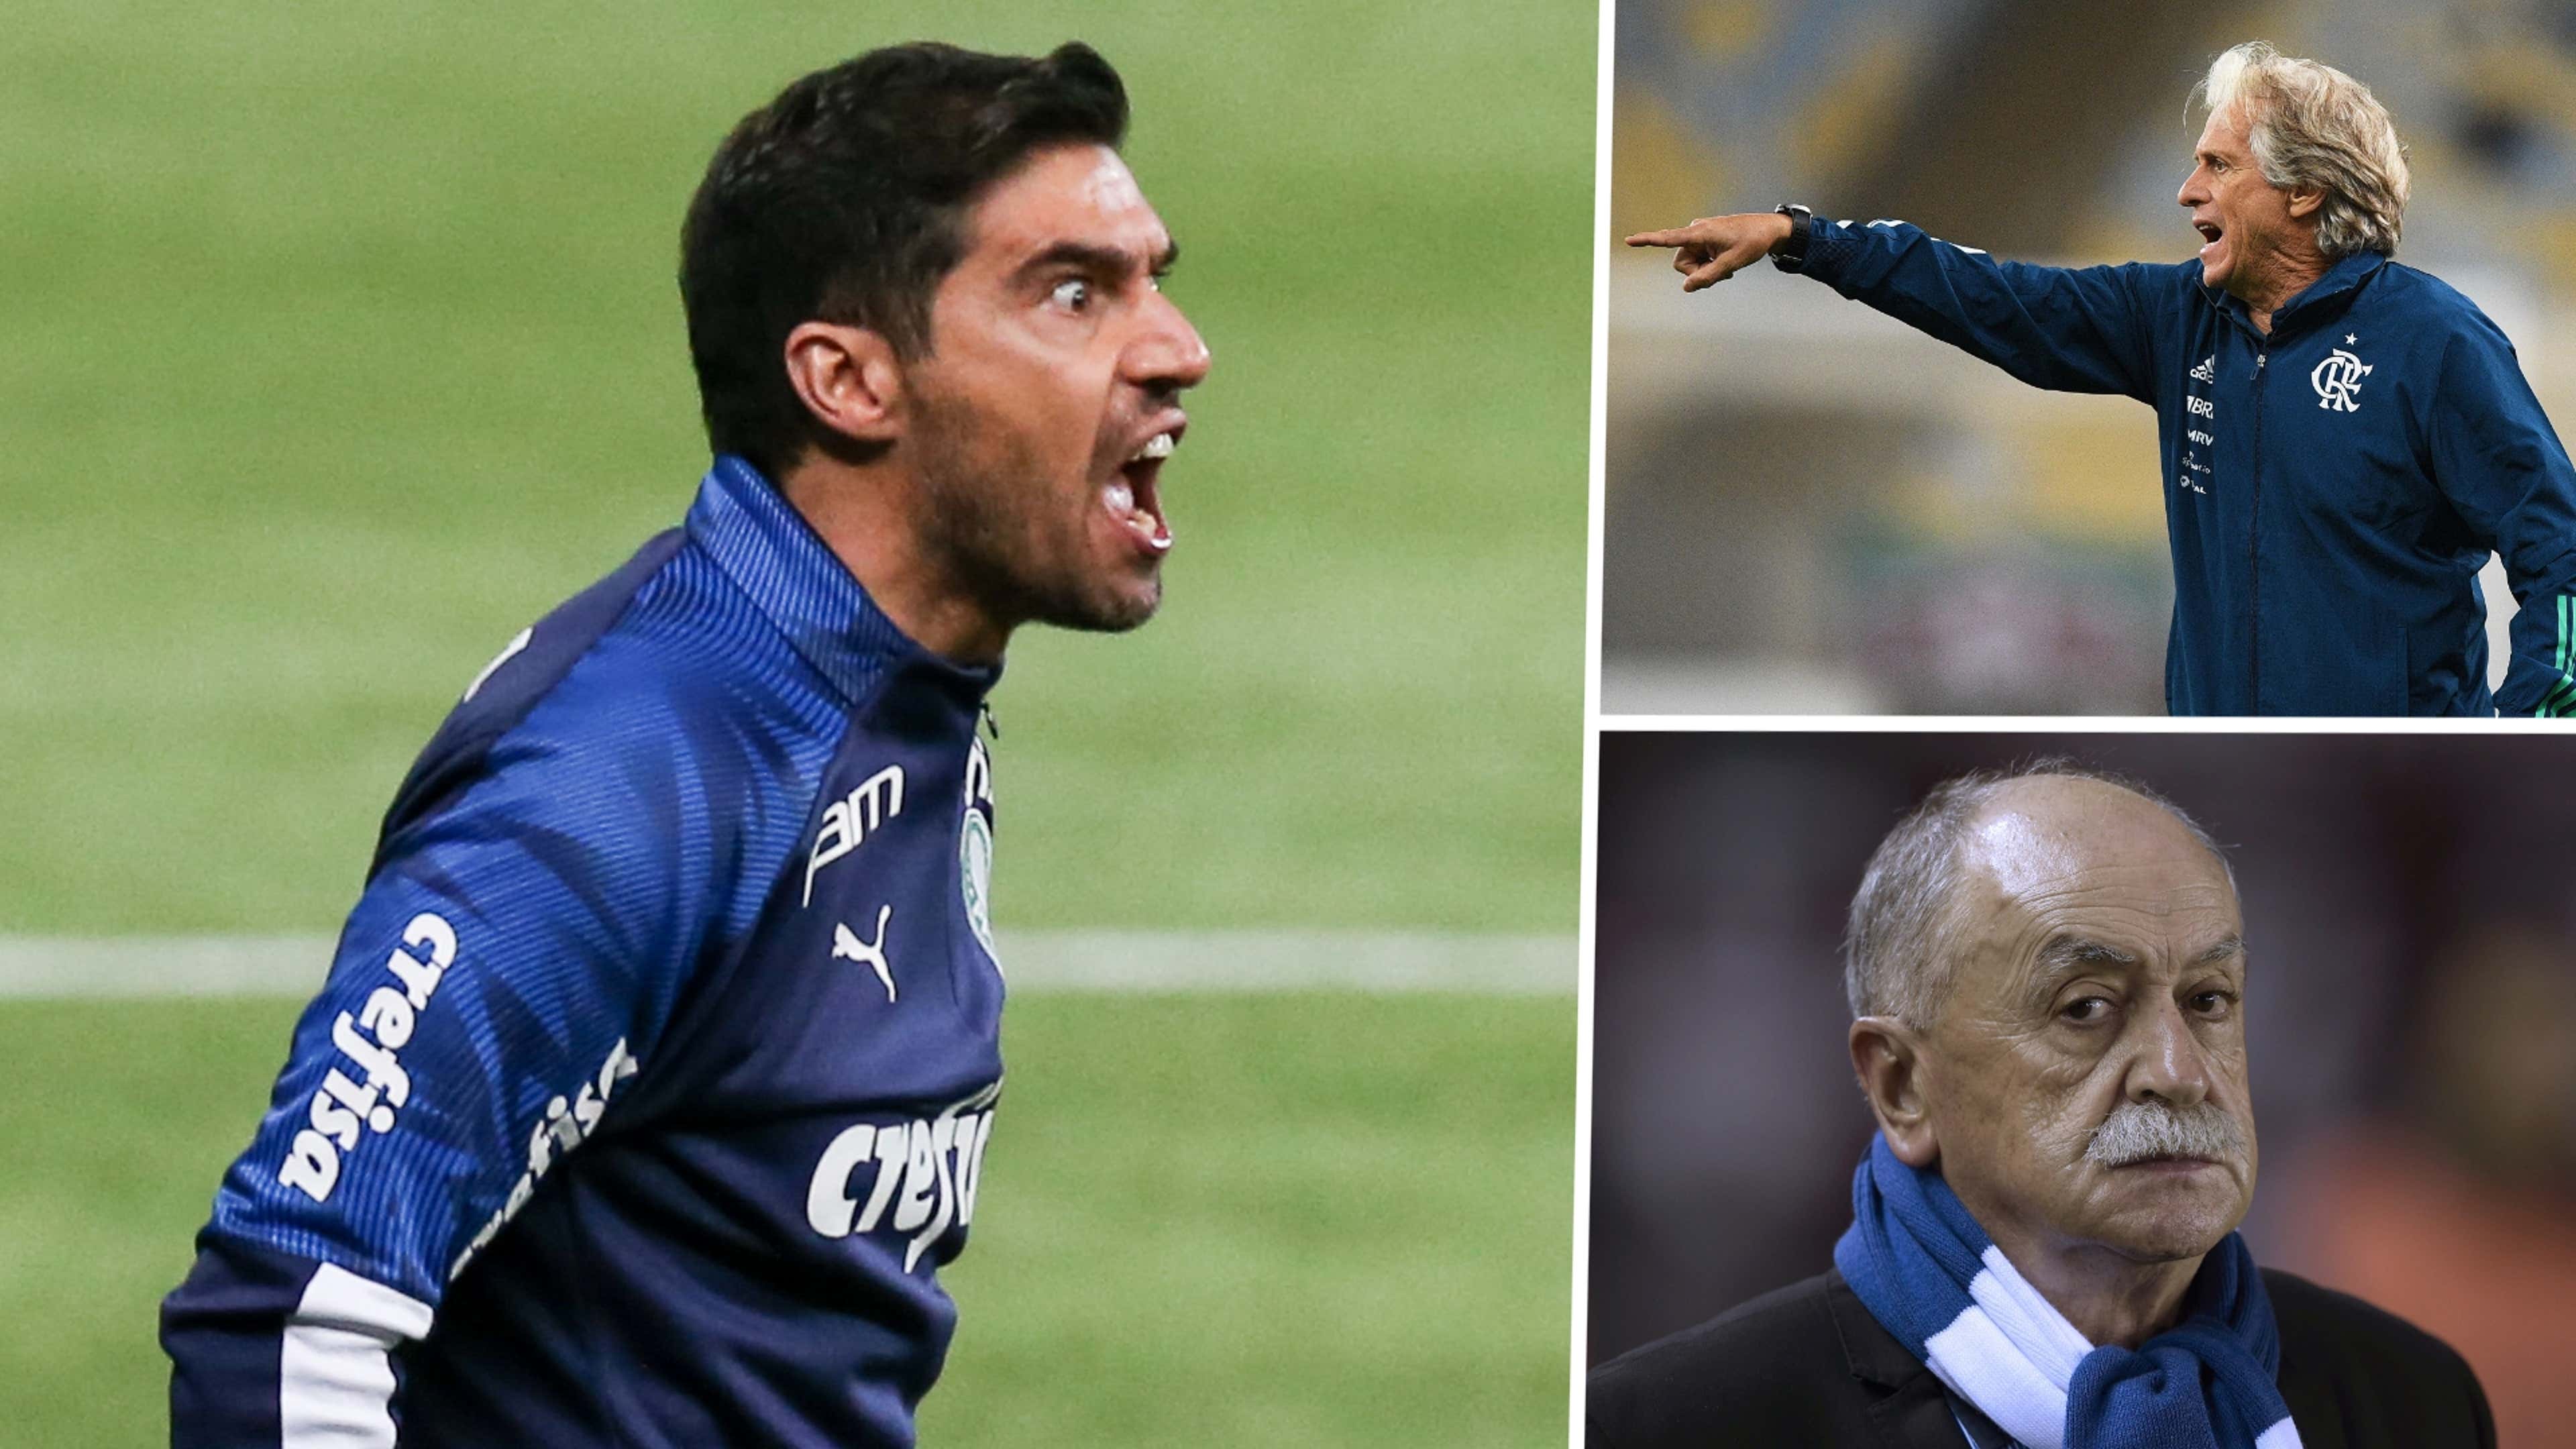 In football, it is kill or be killed' - Ferreira the latest European coach  to shine in South America